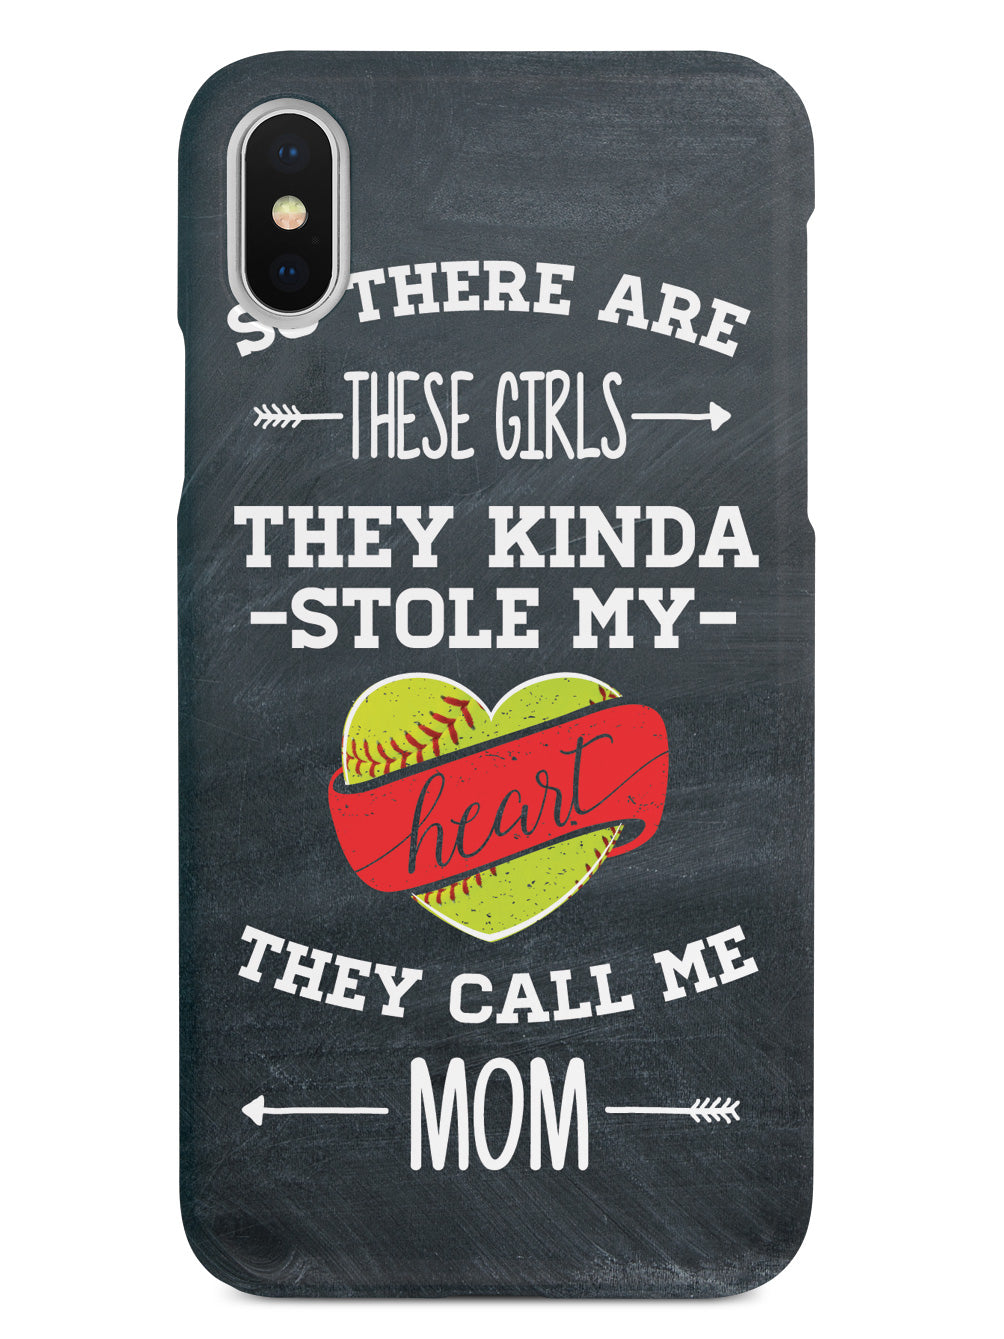 So There Are These Girls - Softball Player - Mom Case